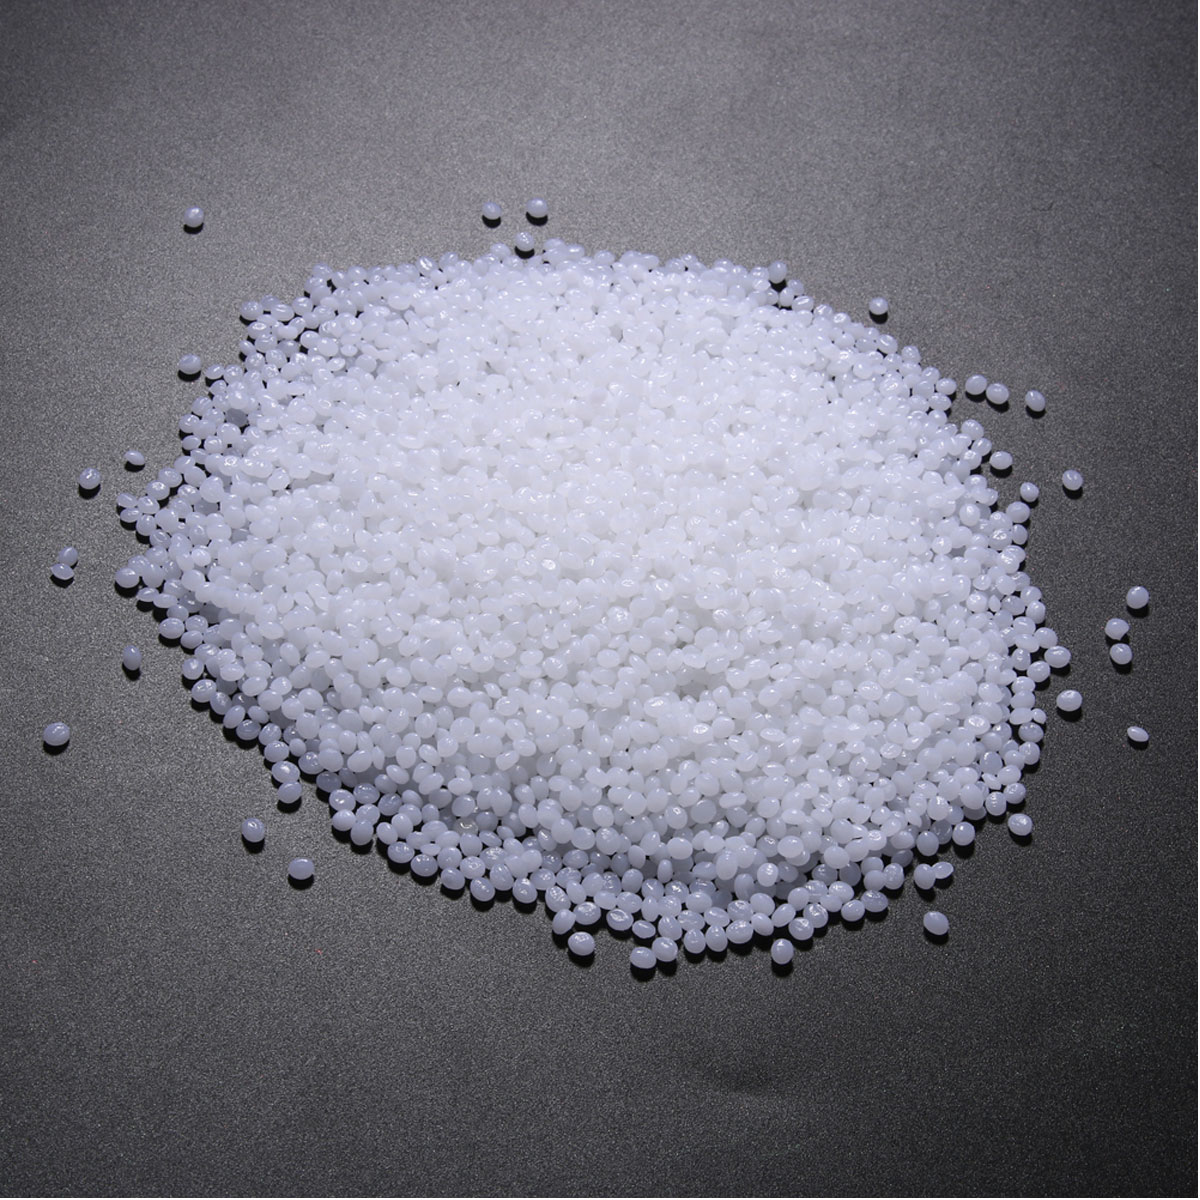 1000g-Plastic-Pellets-Thermoplastic-Particles-60-63degC-Melt-for-DIY-Jewelry-Fixing-Arts-1302793-3